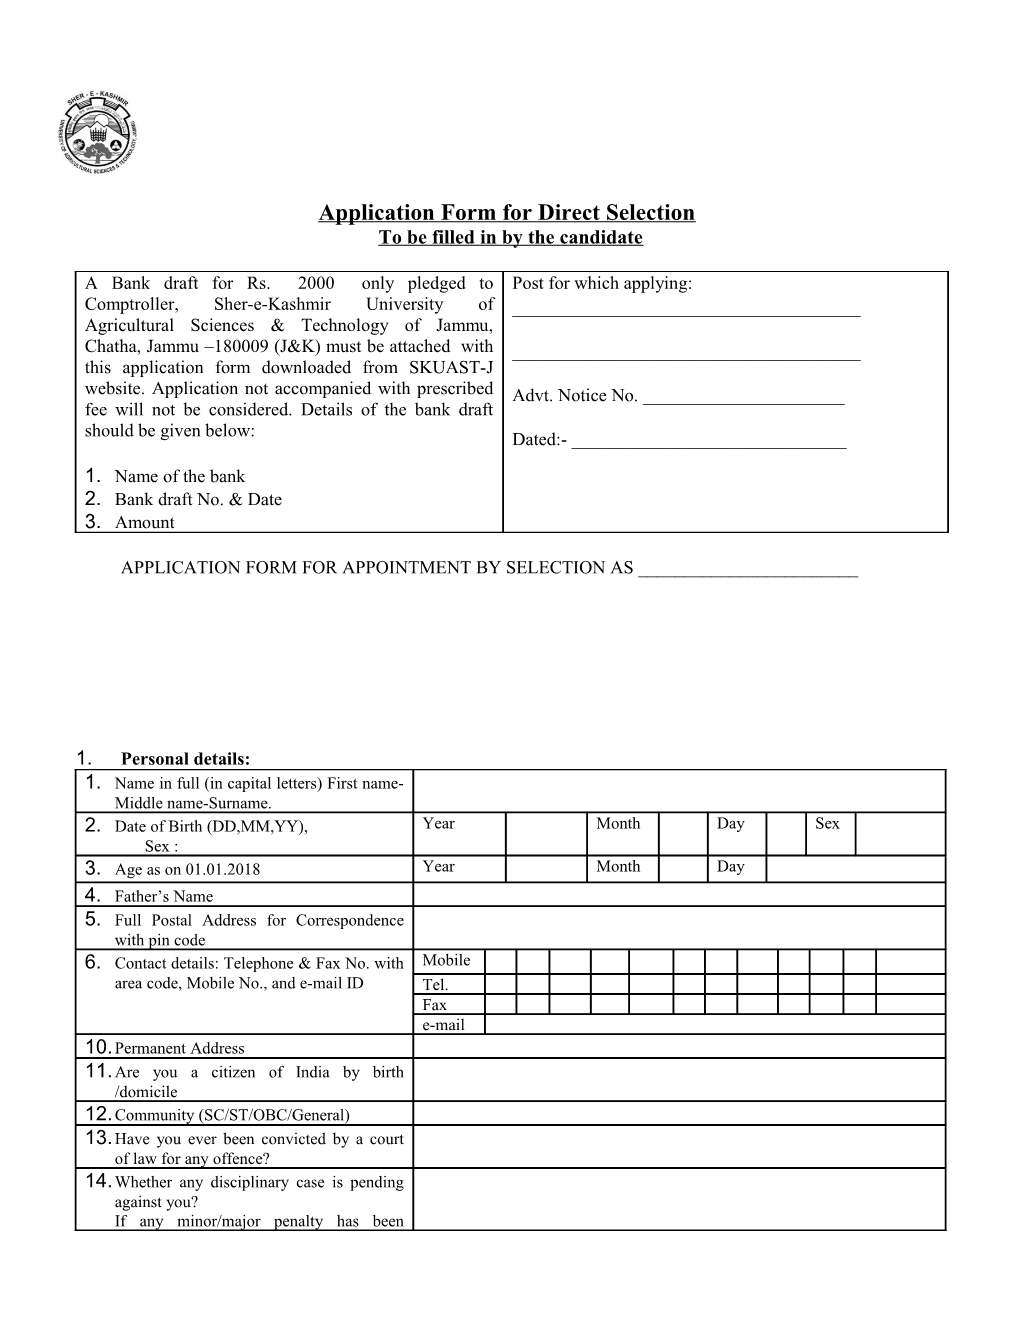 Application Form for Direct Selection